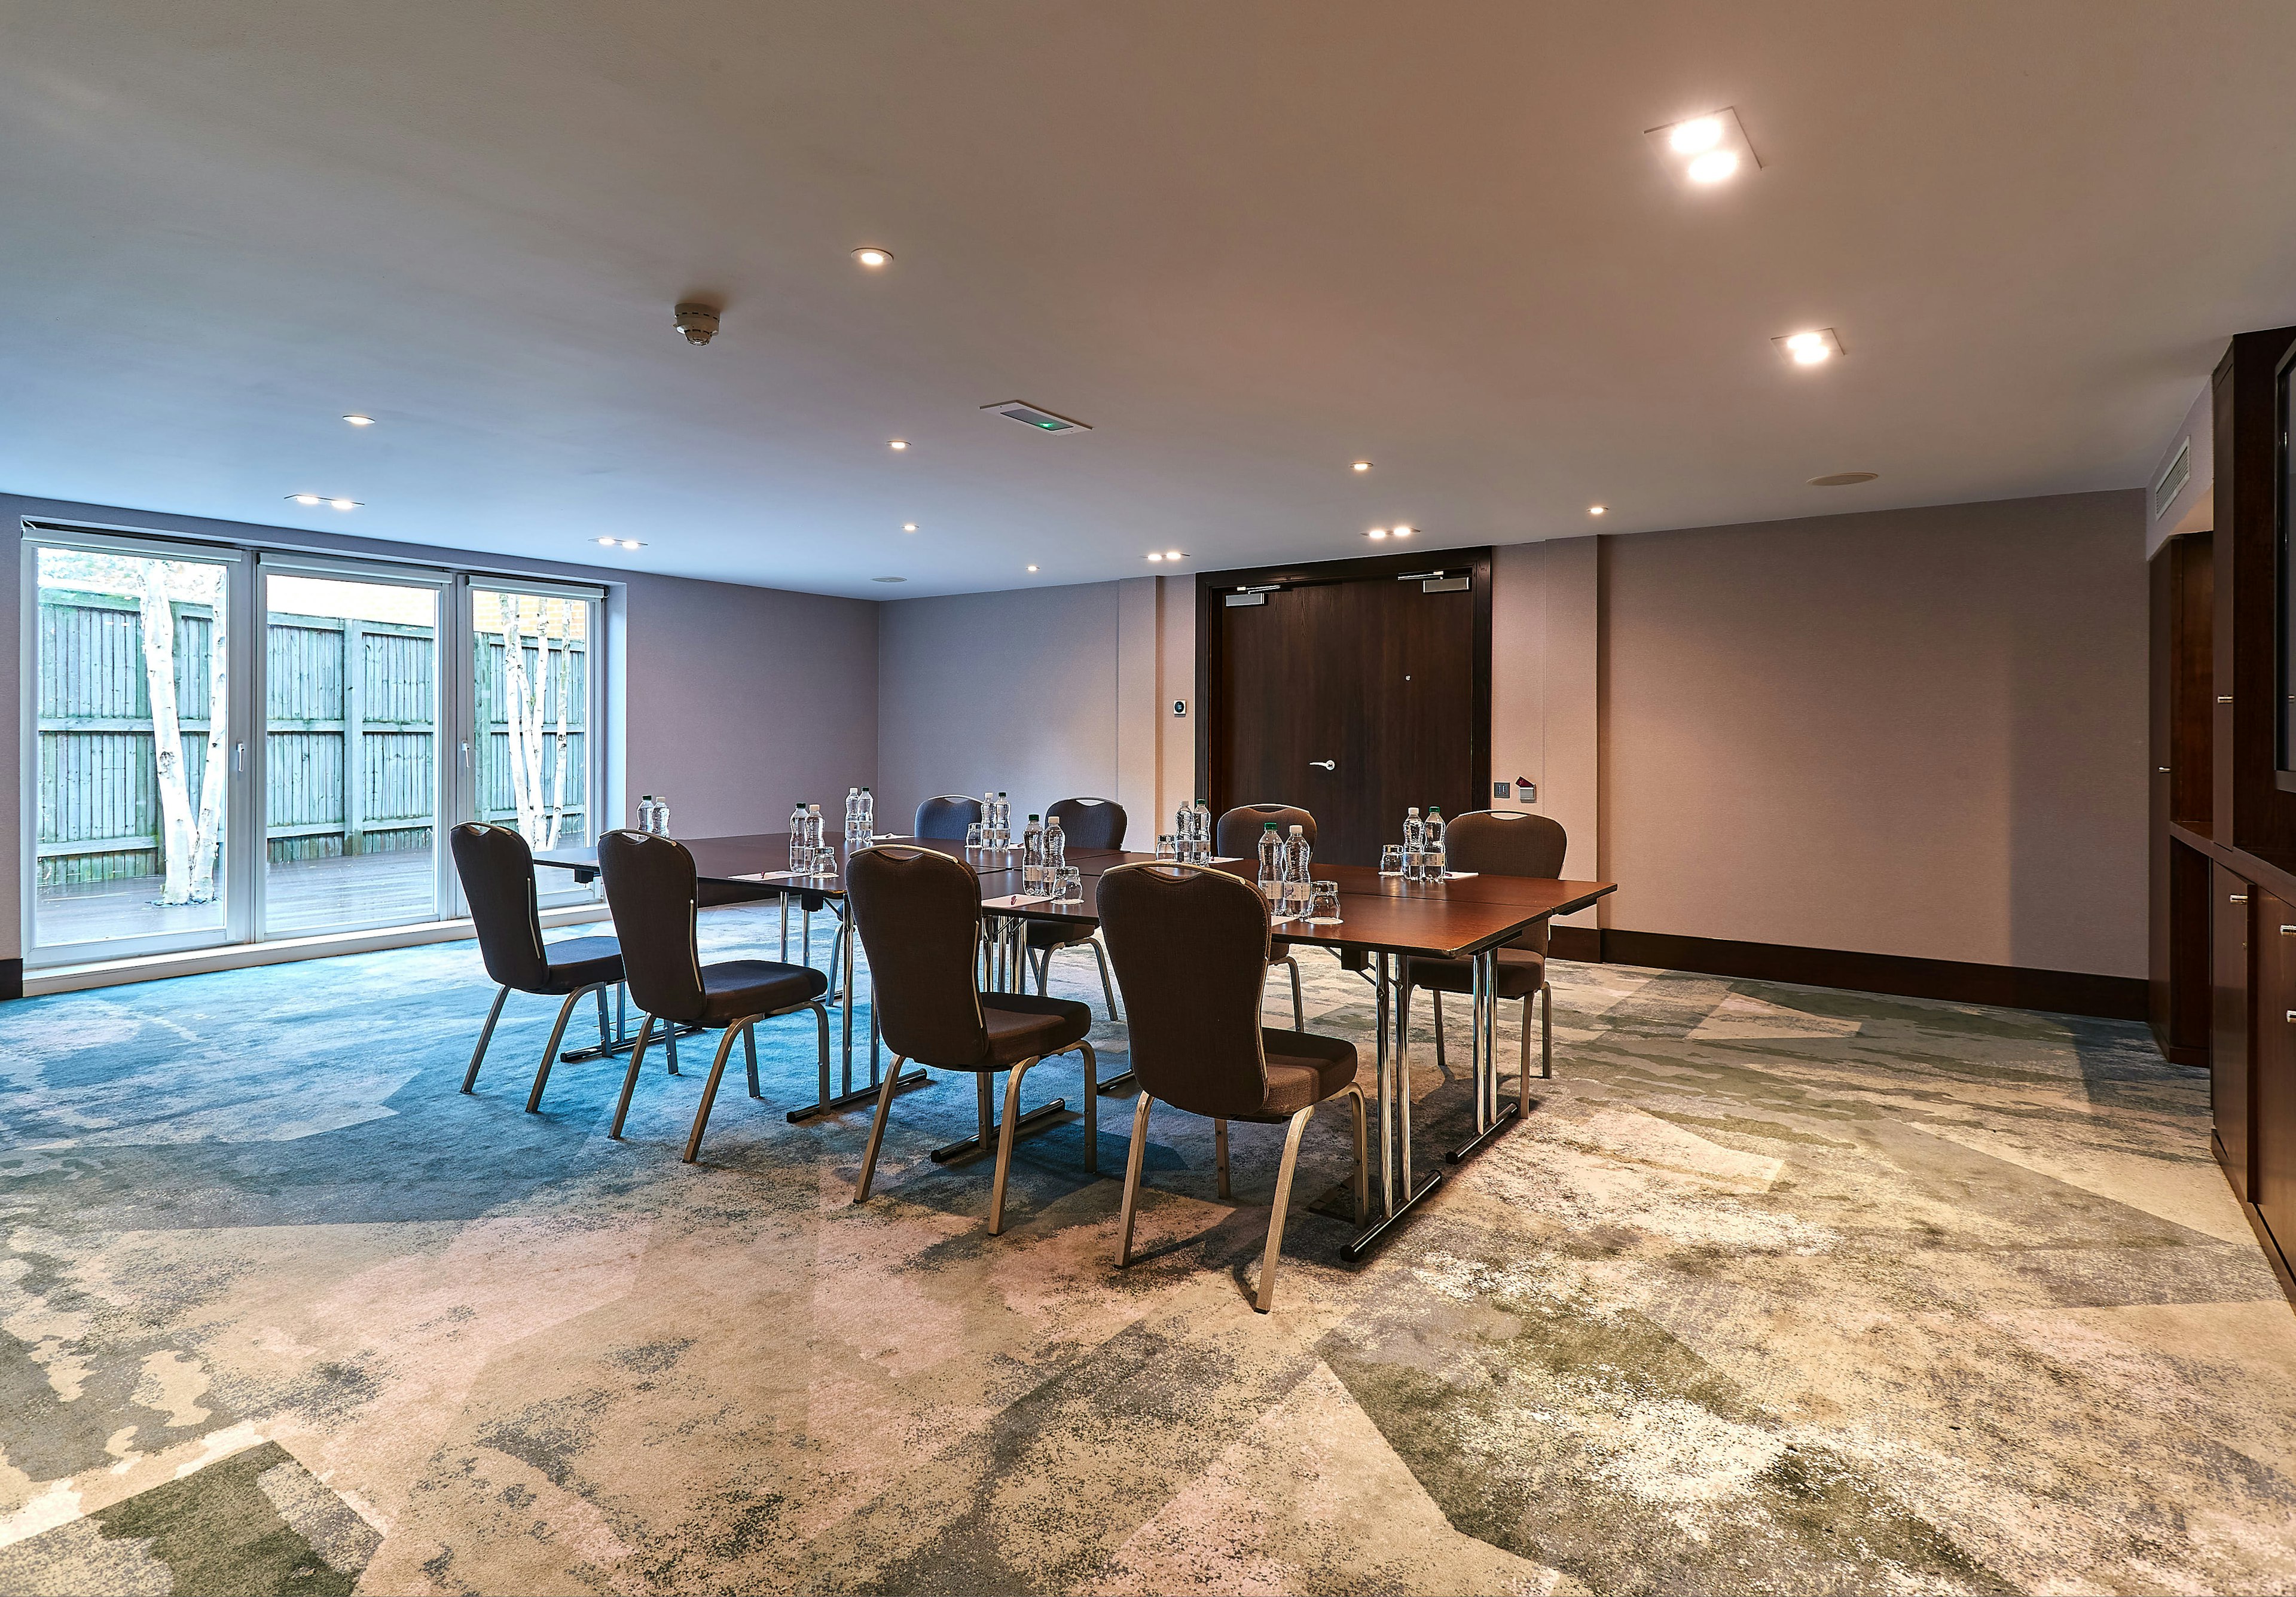 Business - Crowne Plaza Marlow